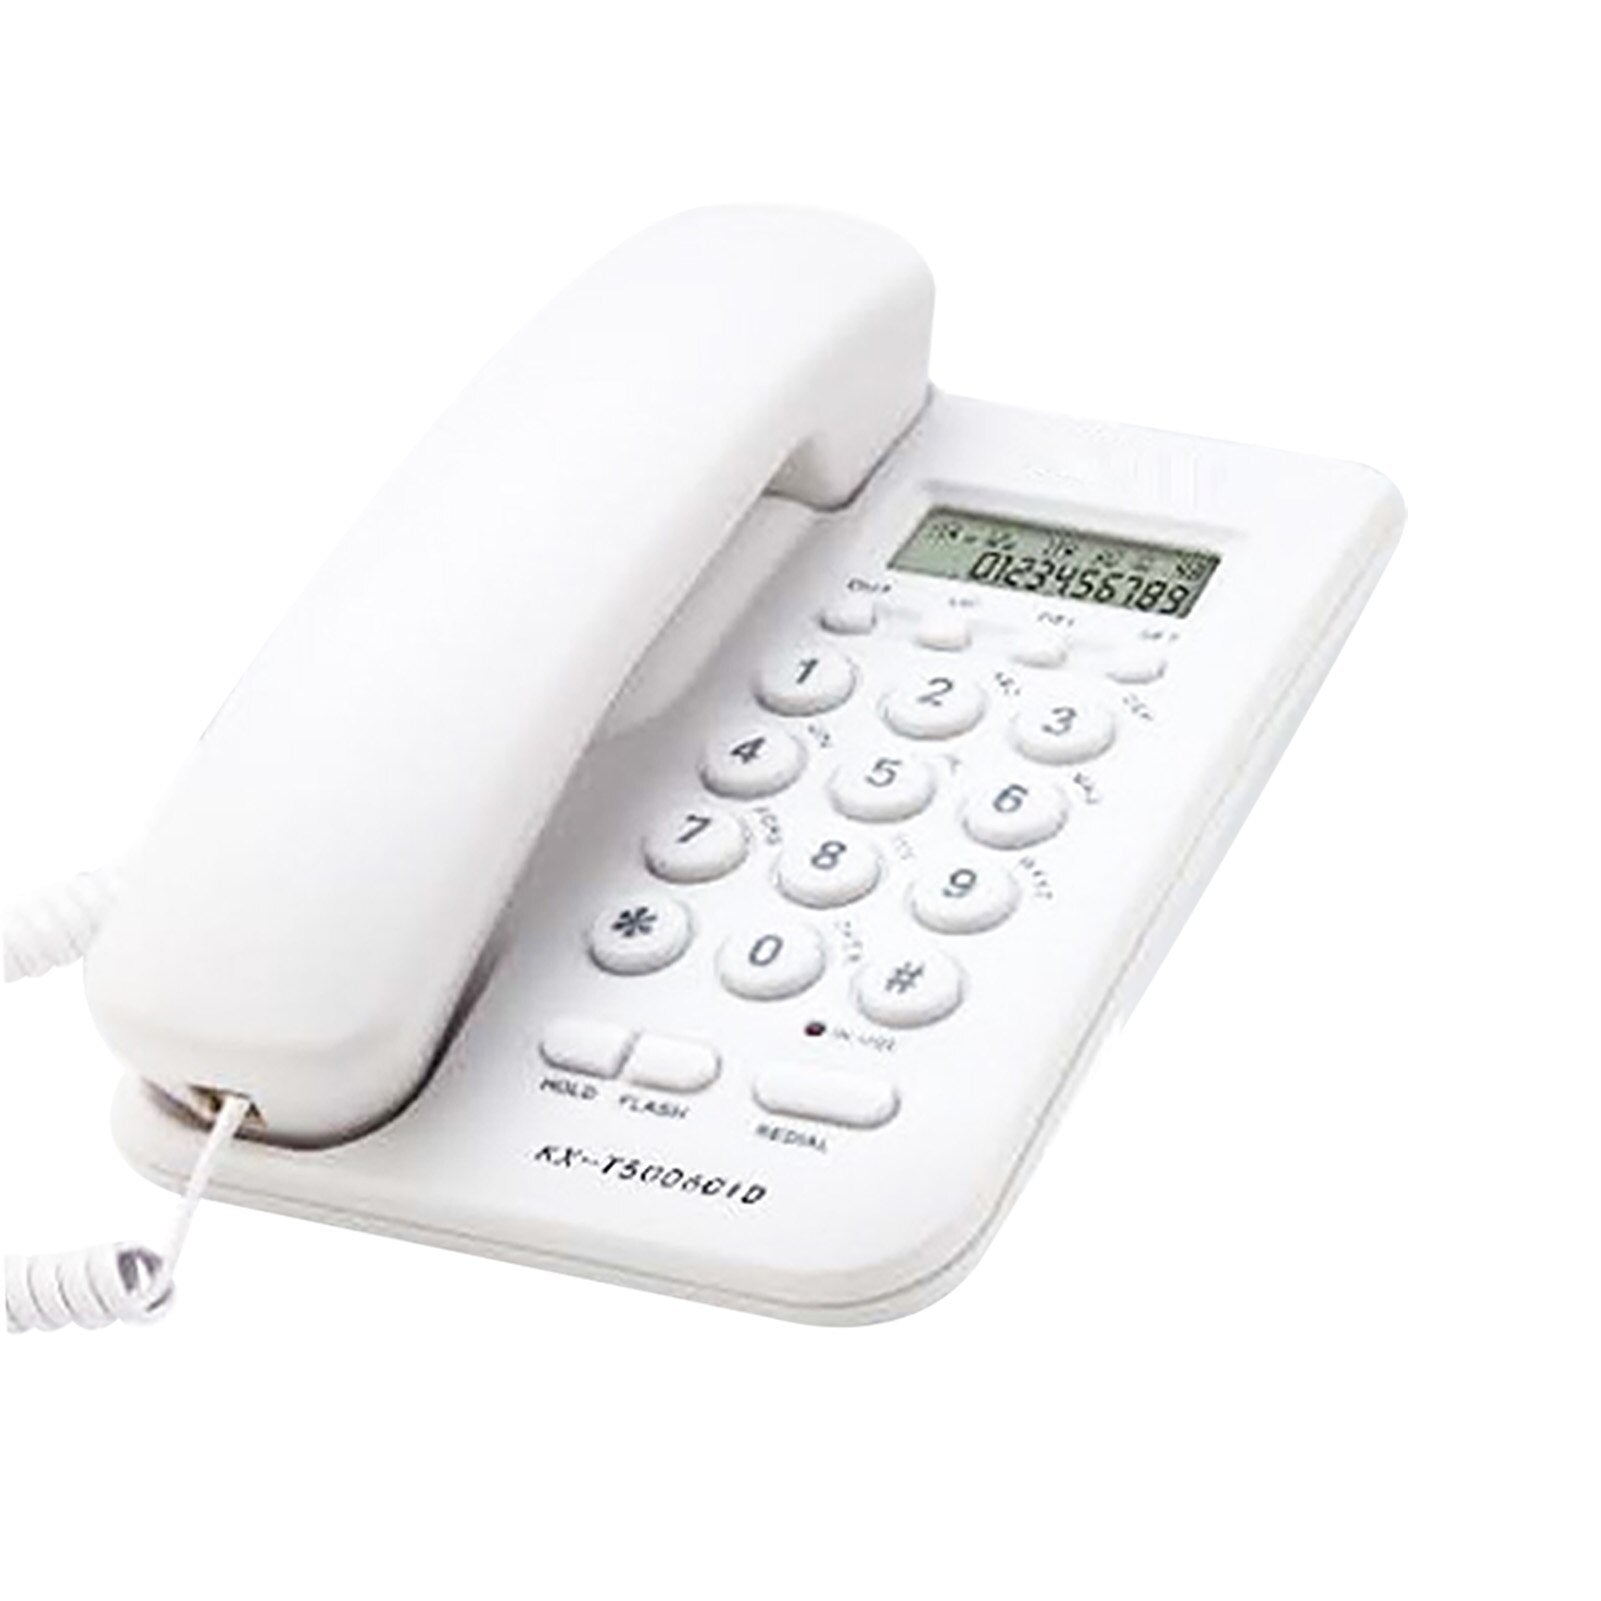 KX-T5006CID Corded Telephone Business Wall Mounted Callback Caller ID Big Button LCD Display Hotel Landline Phone